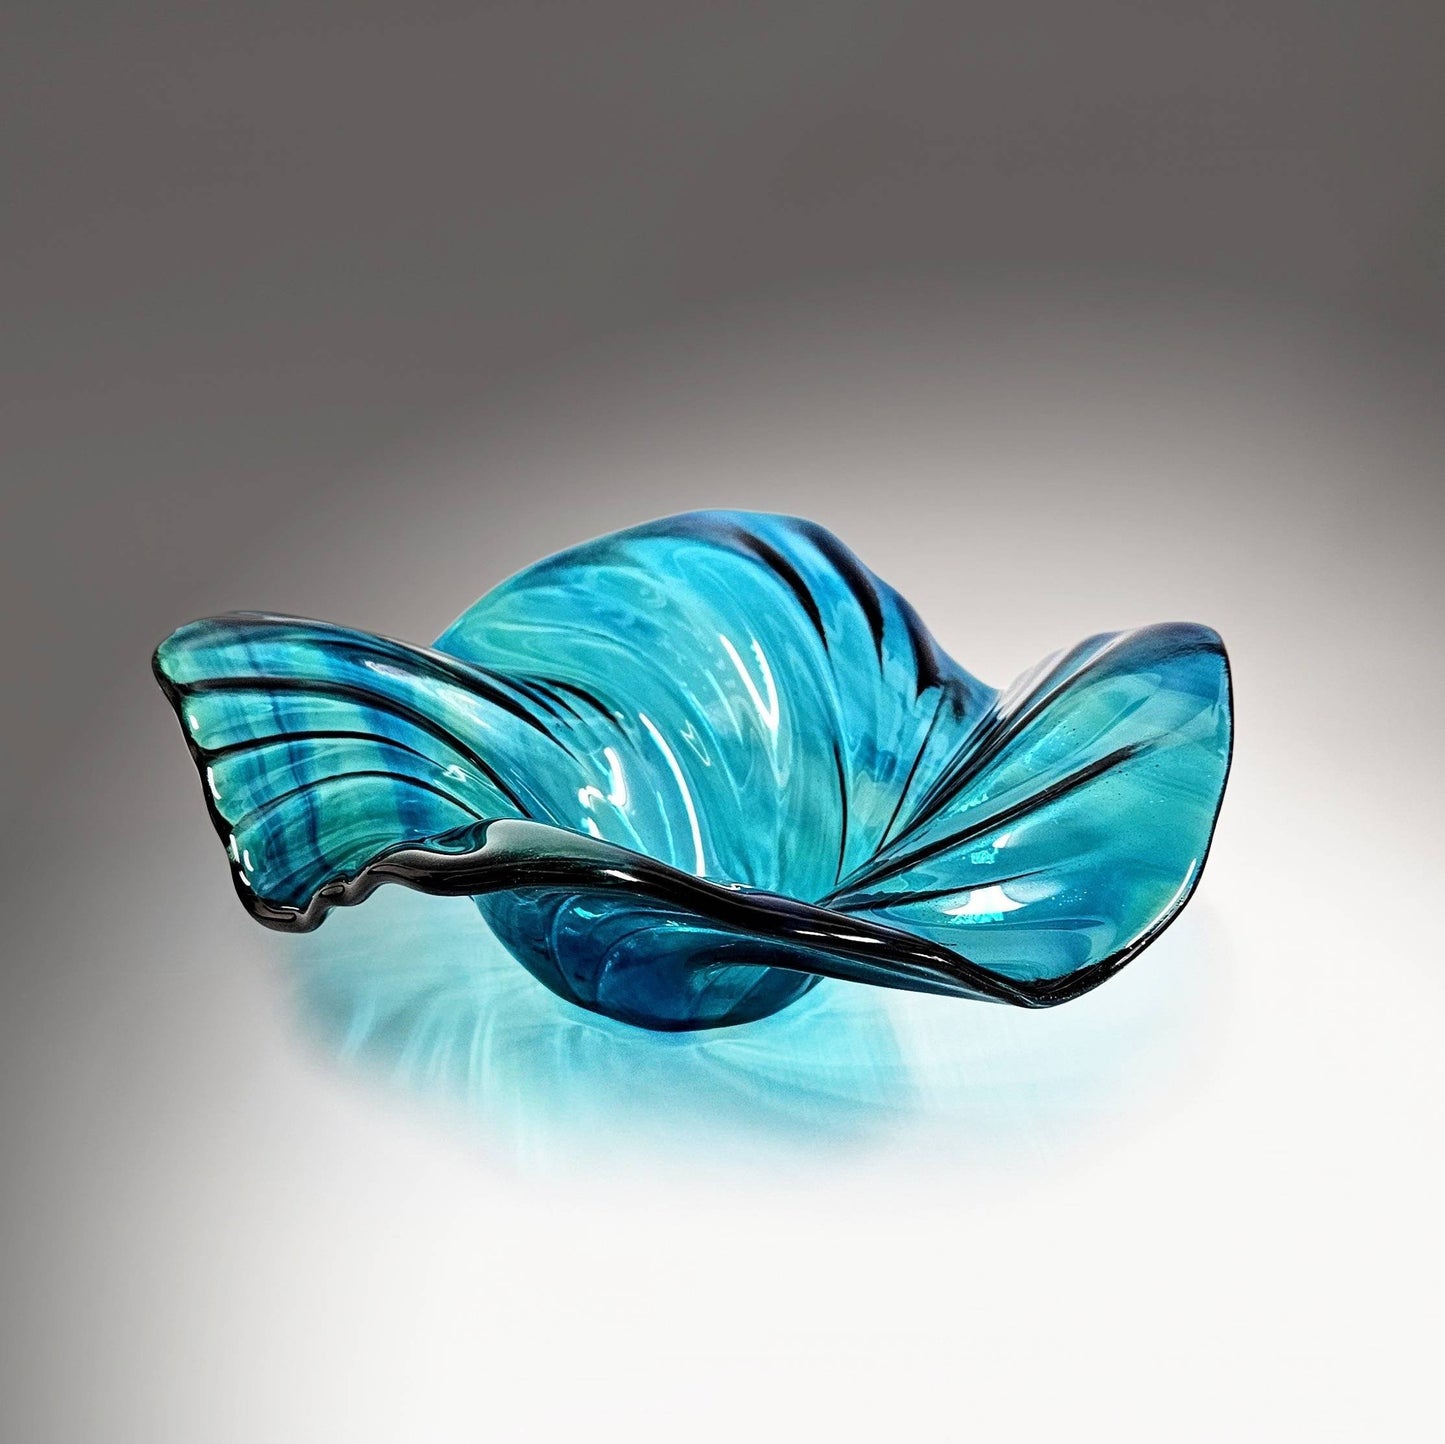 Oblong Wave Bowl in Teal Aqua Turquoise